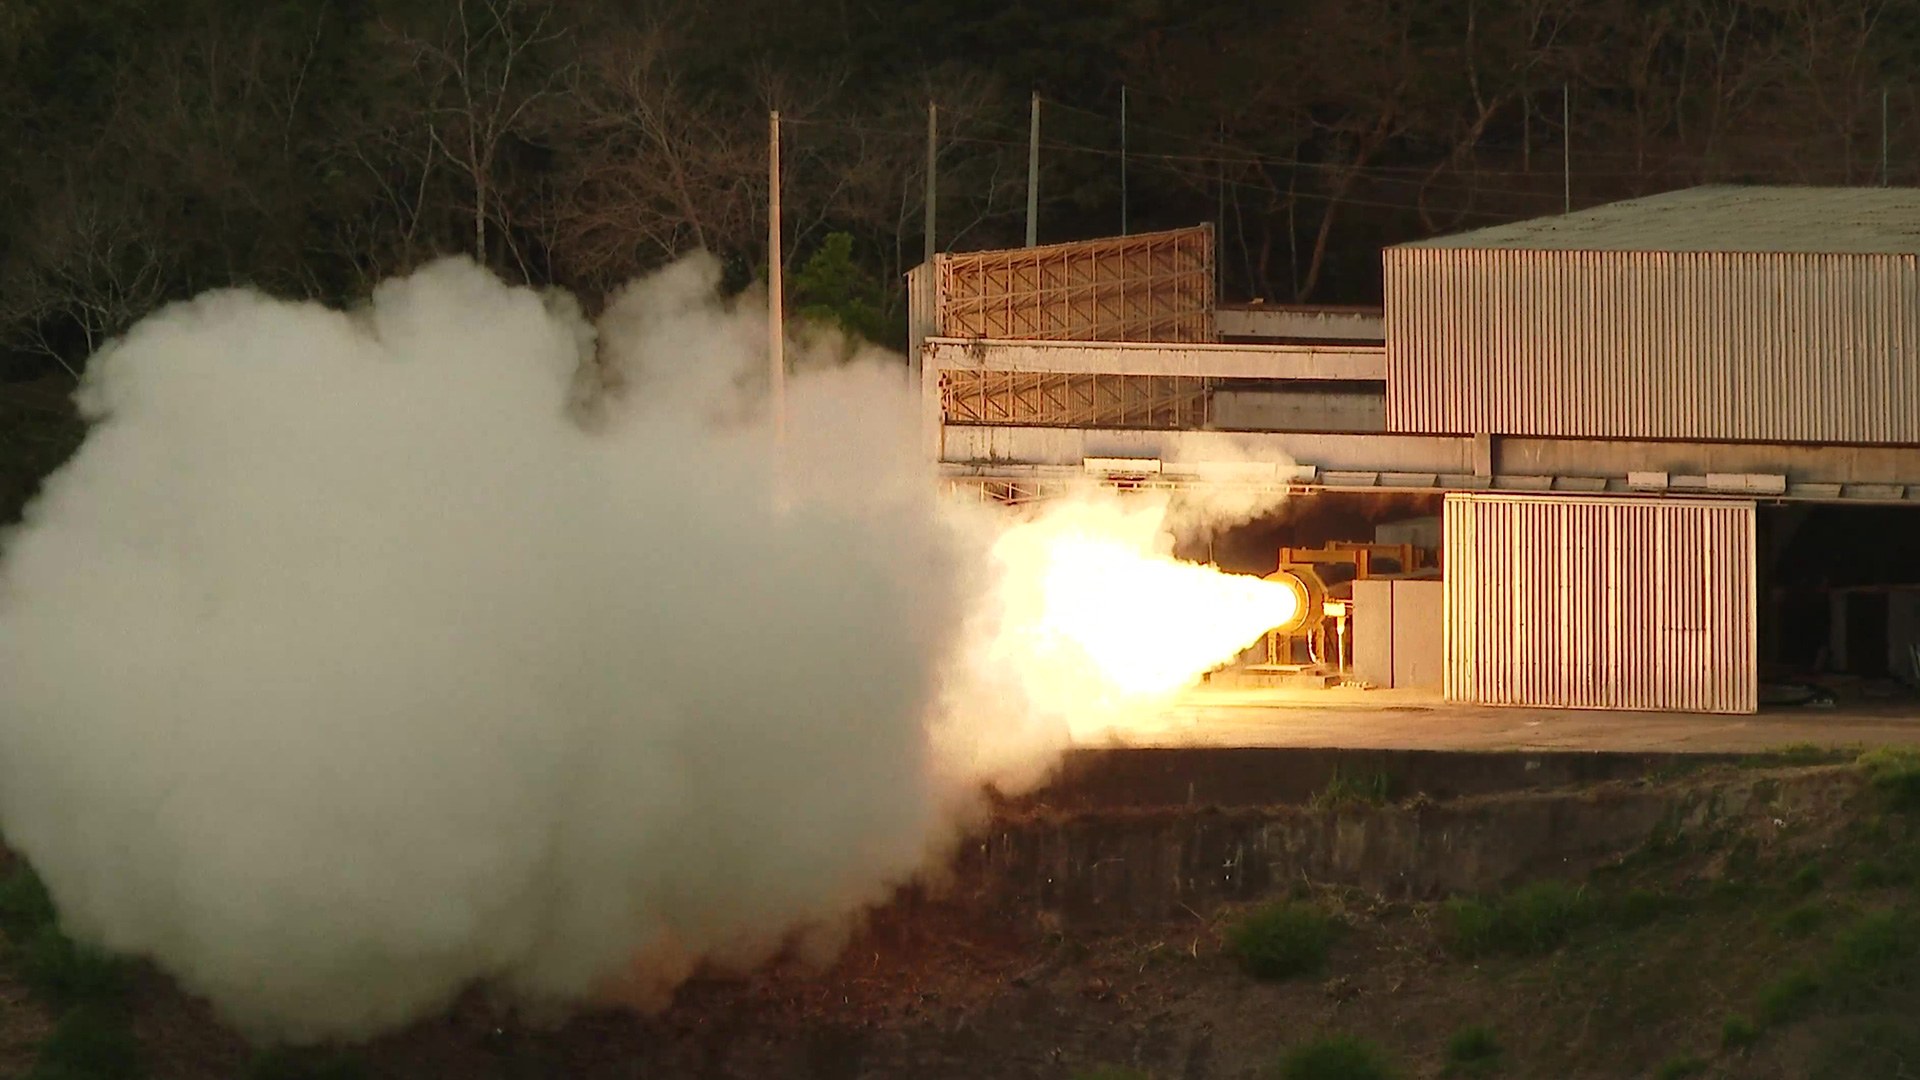 The S50 solid-propellant rocket motor during the static firing test in Brazil